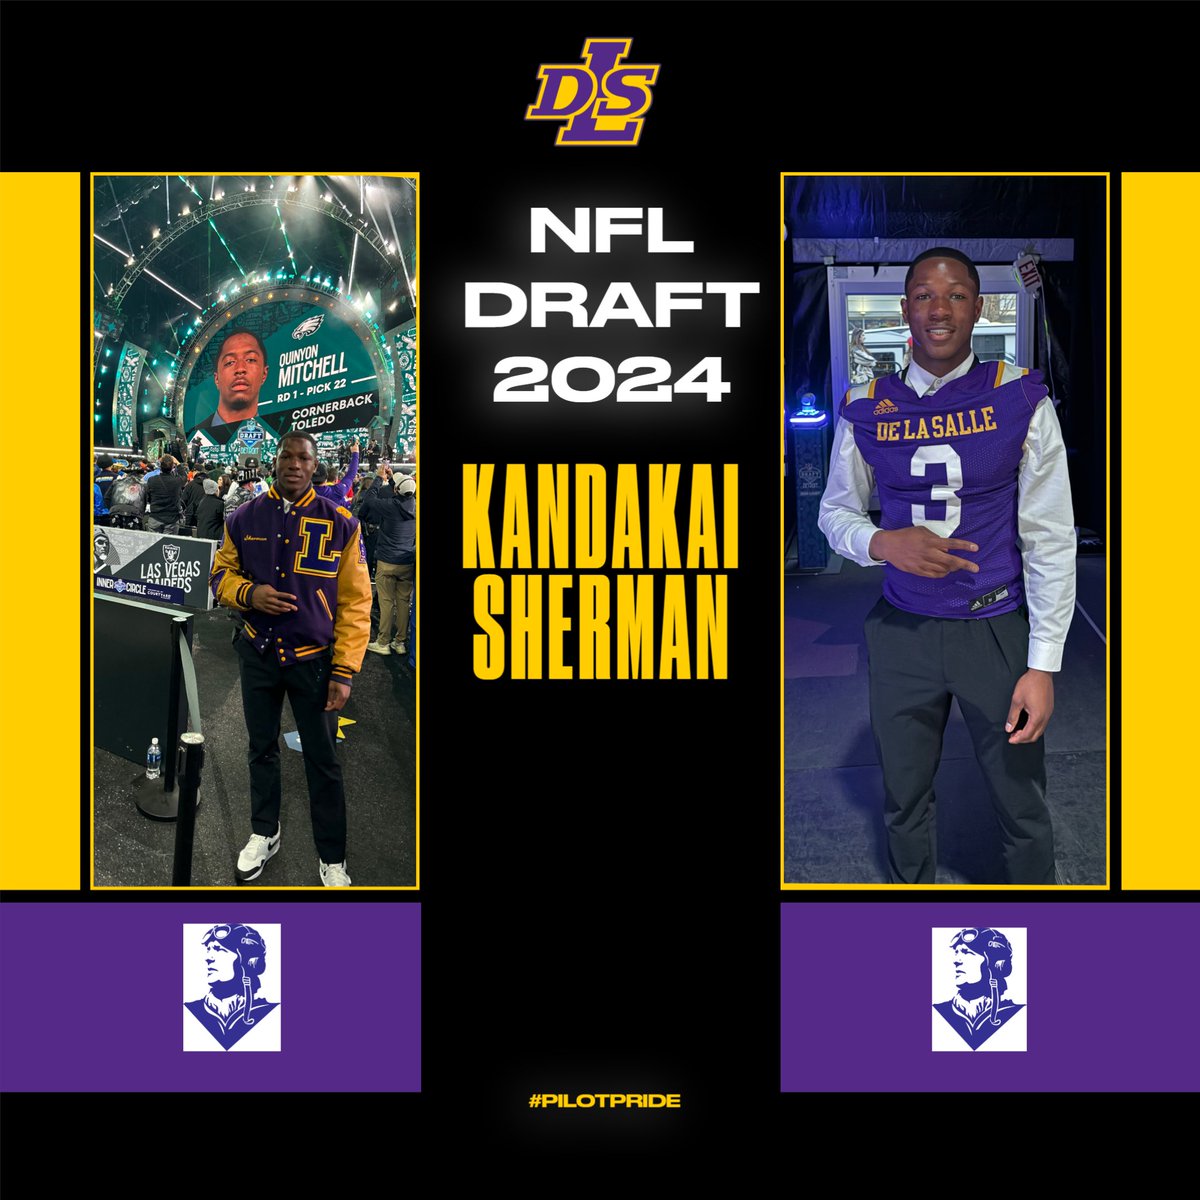 DLS senior Kandakai Sherman proudly displayed his purple & gold when he took part in the NFL Draft Experience last week with a record-breaking 750,000 in attendance over three days!! We are proud of our Pilot! #PilotPride @NFL